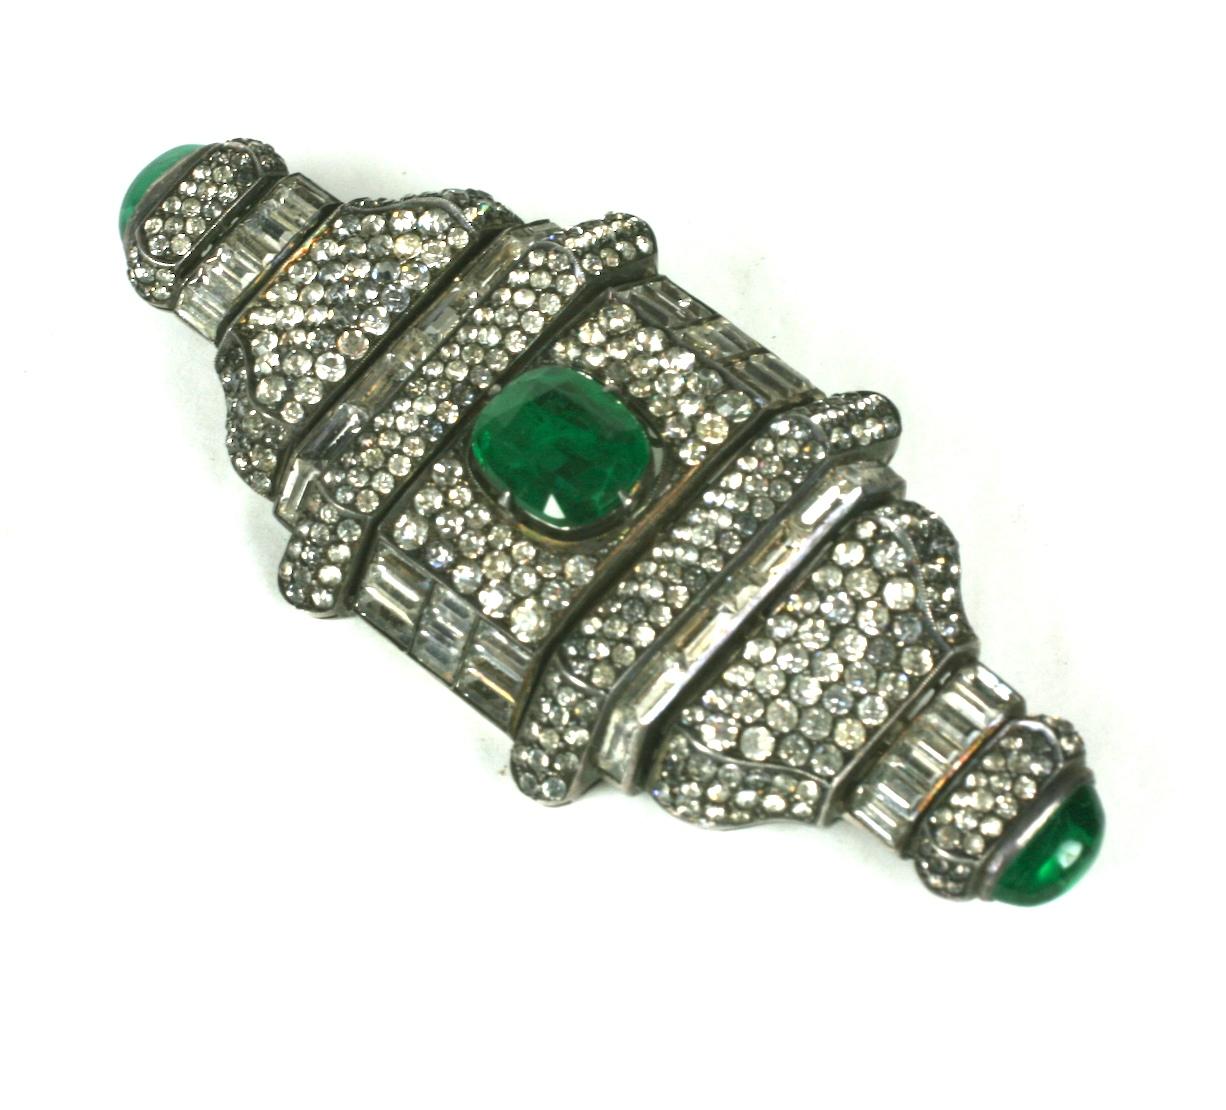 Massive and Amazing Art Deco Paste Brooch, super dimensional, the finest of its kind from this period. Wonderful quality, hand made and set in sterling silver with faux emeralds and diamonds.
1930's France.   3.5